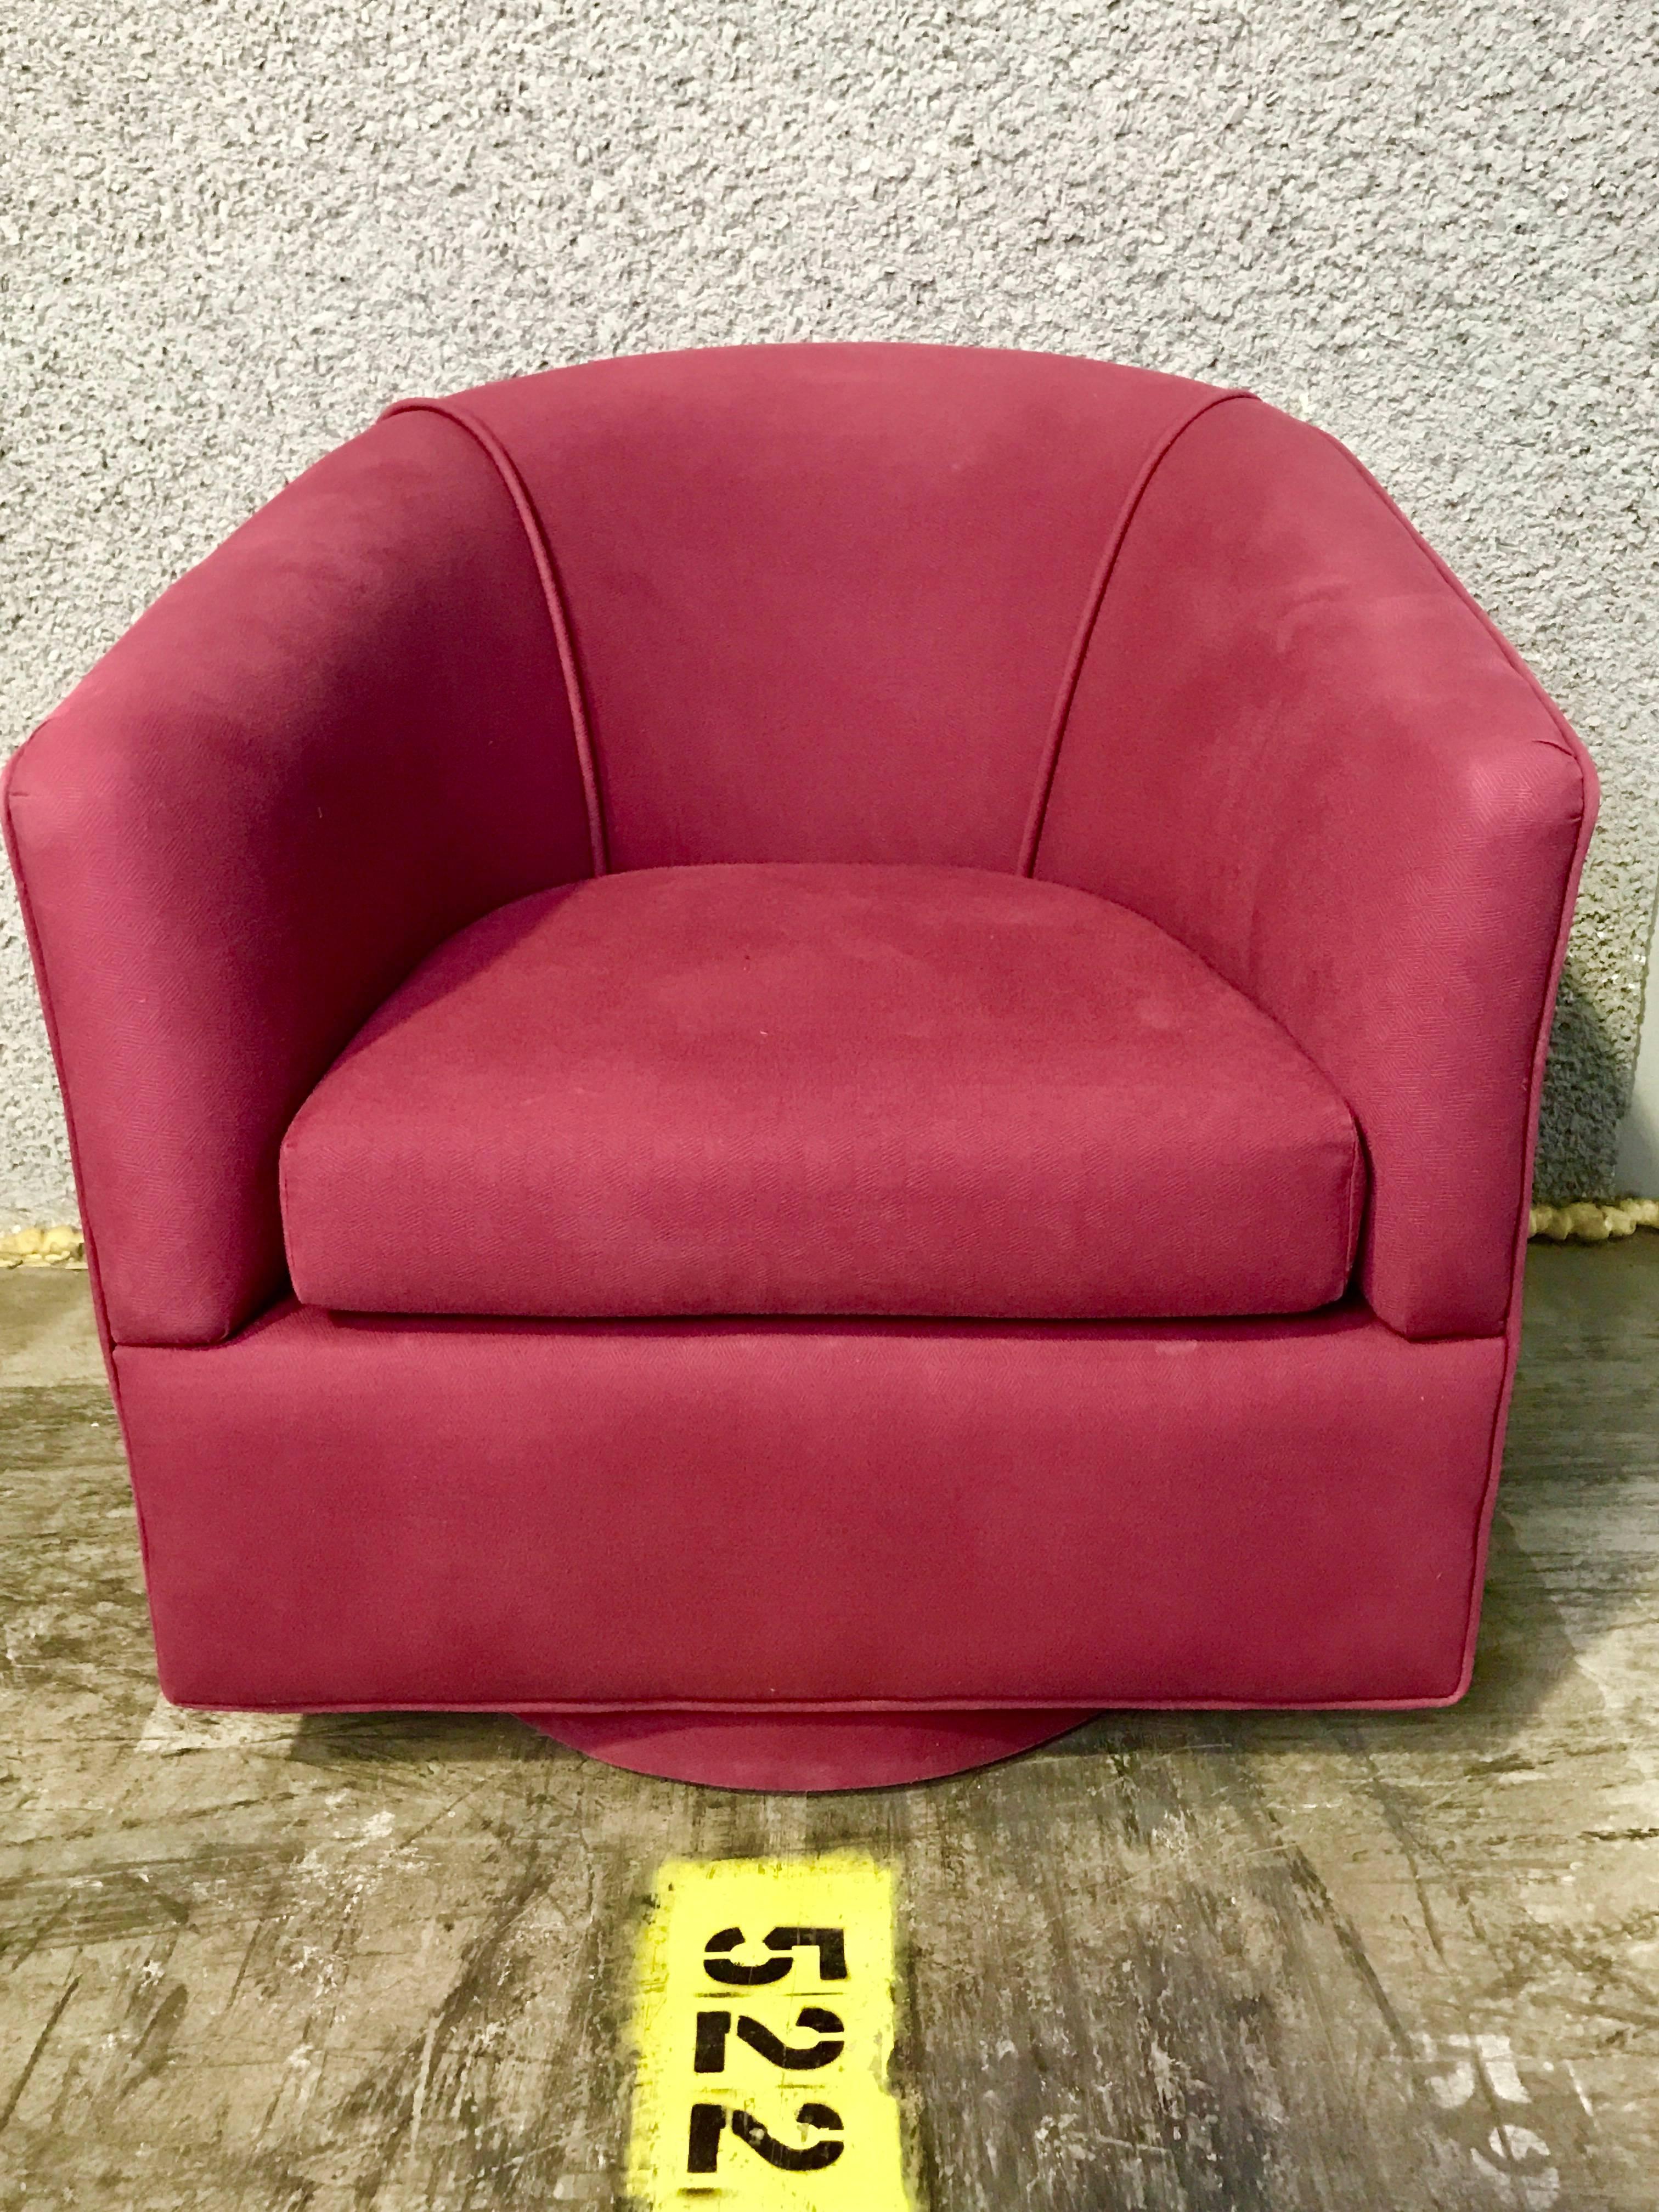 Pair of Milo Baughman style swivel chairs, each one raised on circular upholstered bases, ready for re-upholstery in the fabric of your choice. Great sleek frames. The seat cushion measures 20